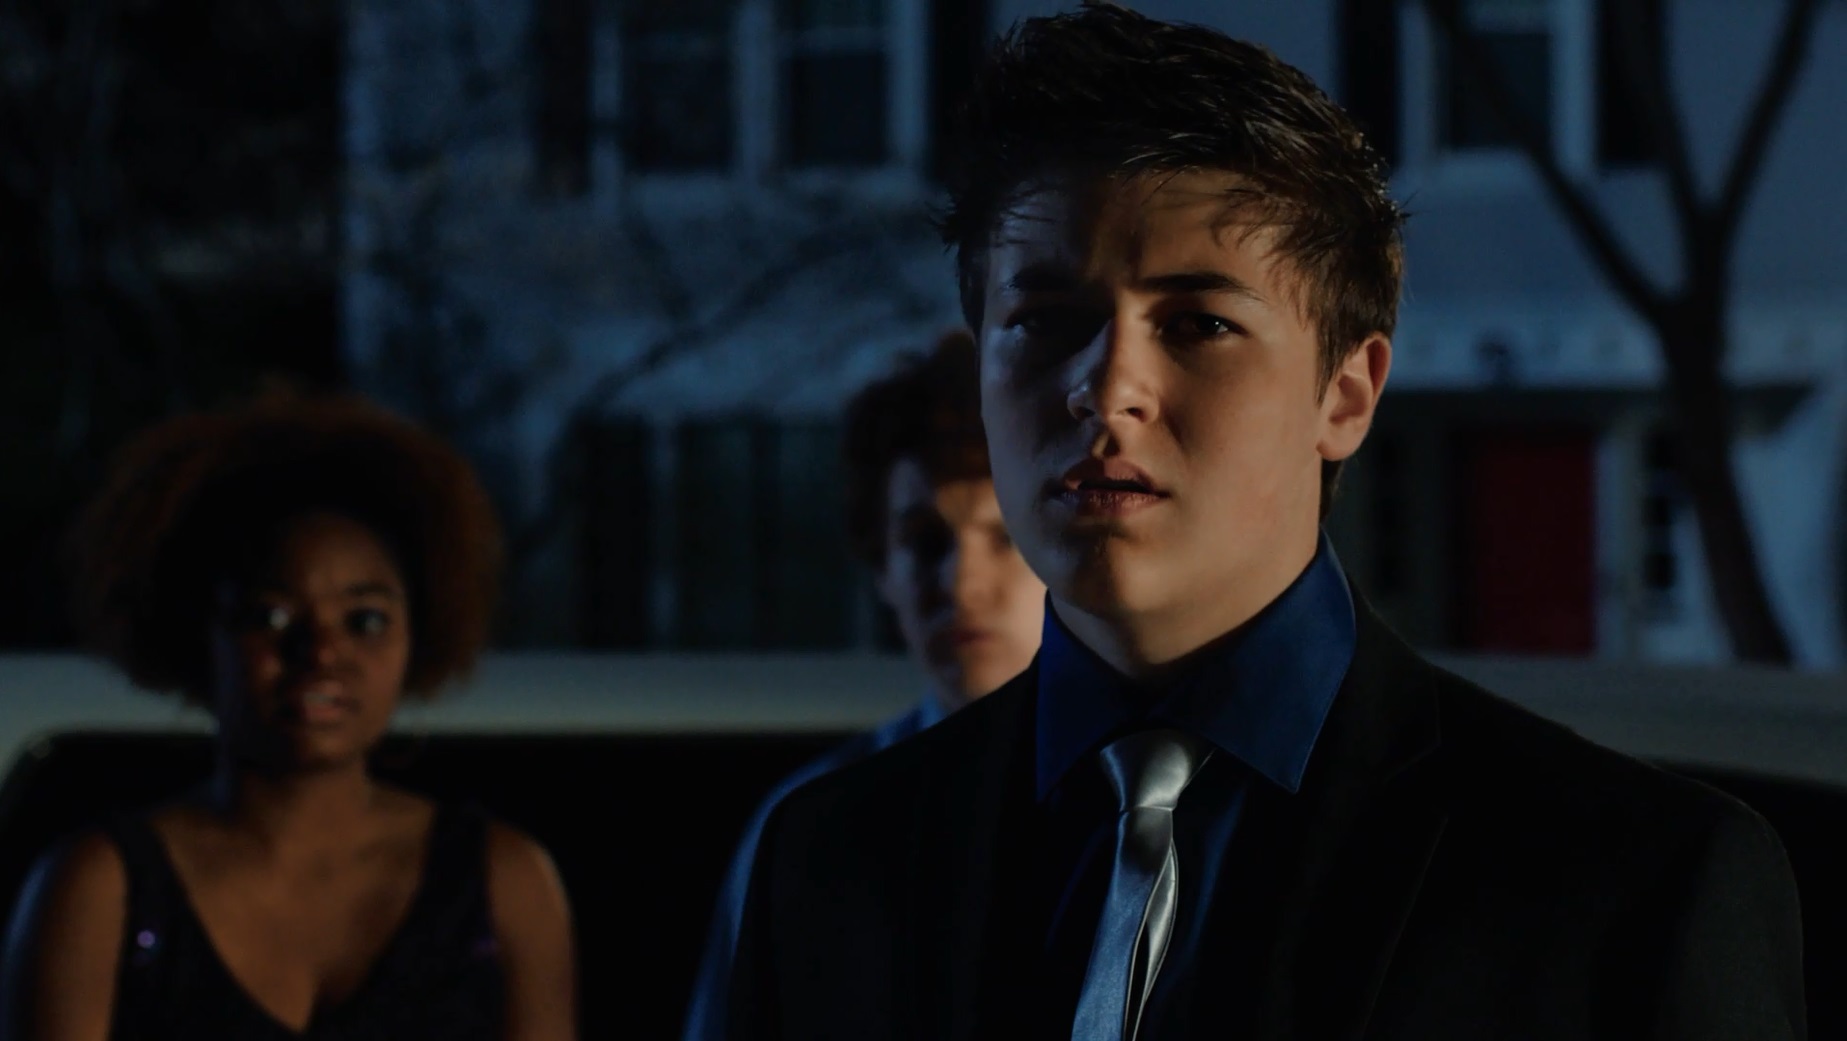 Jacob M Williams in a still shot from the film 